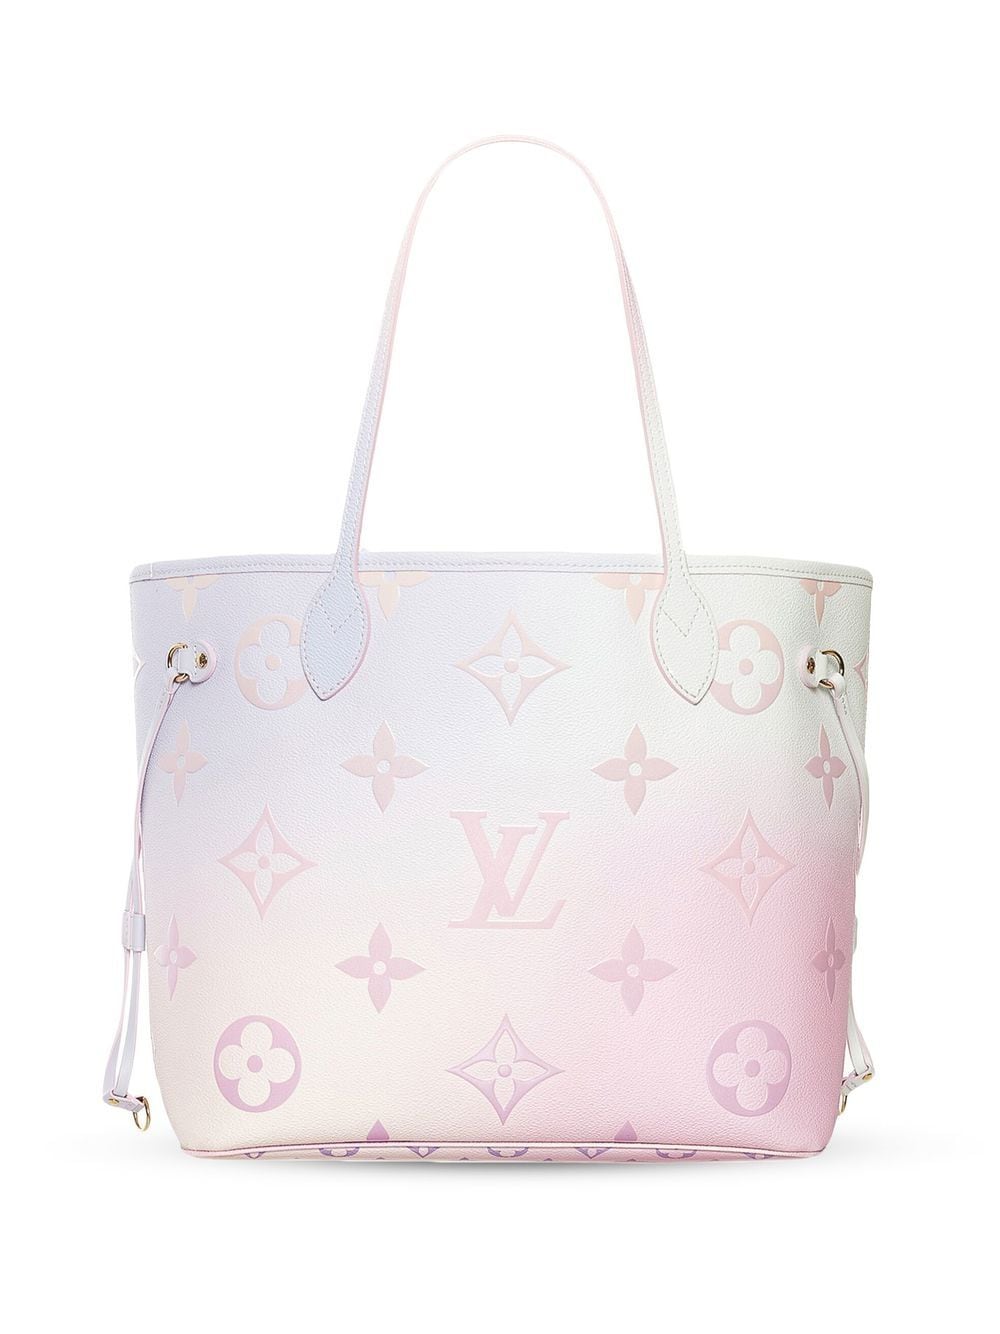 louis vuitton neverfull spring in the city